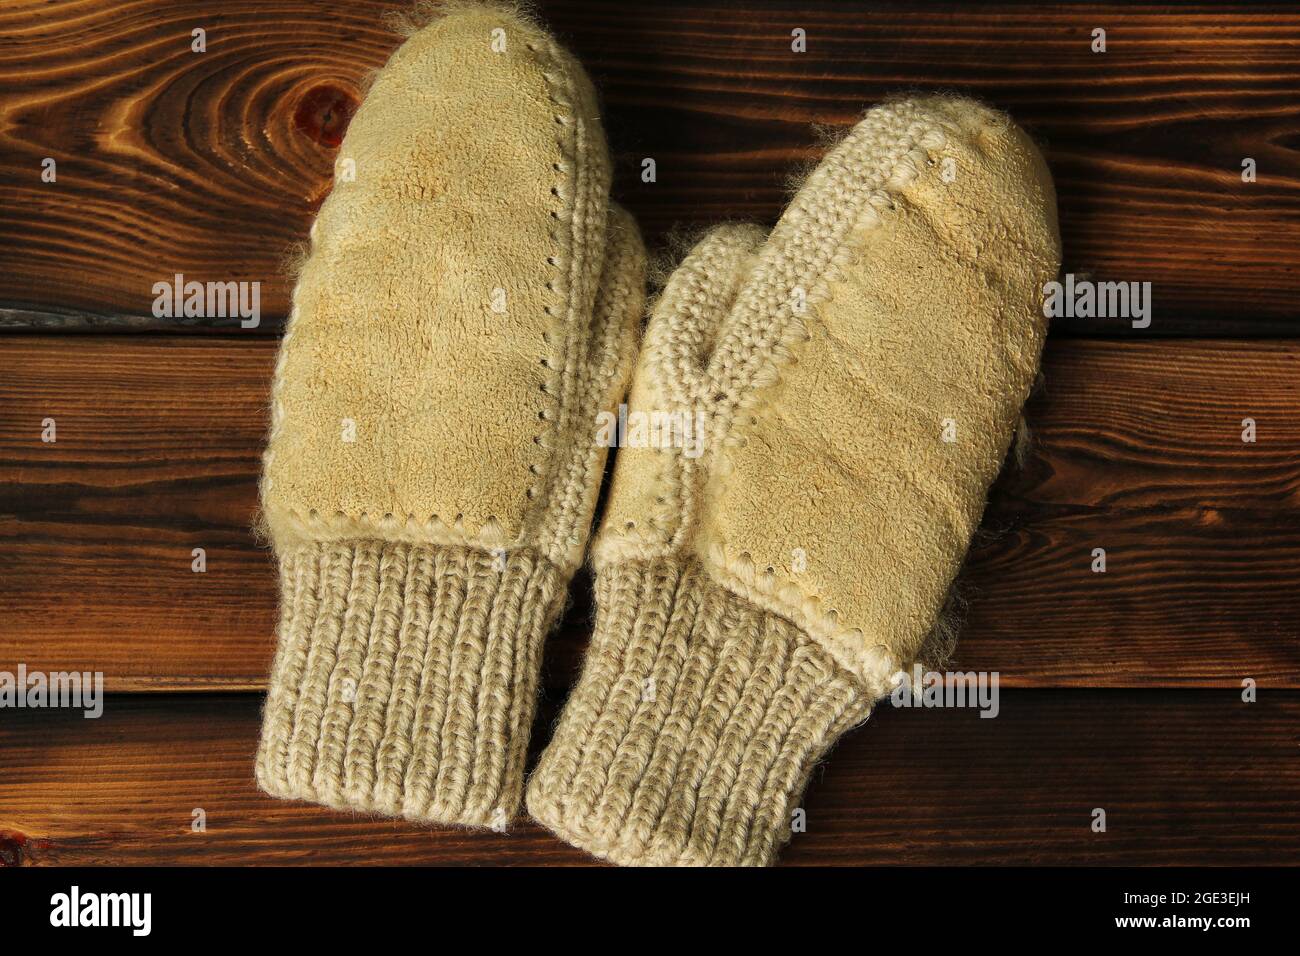 Mittens on a wooden background. Winter clothes Stock Photo